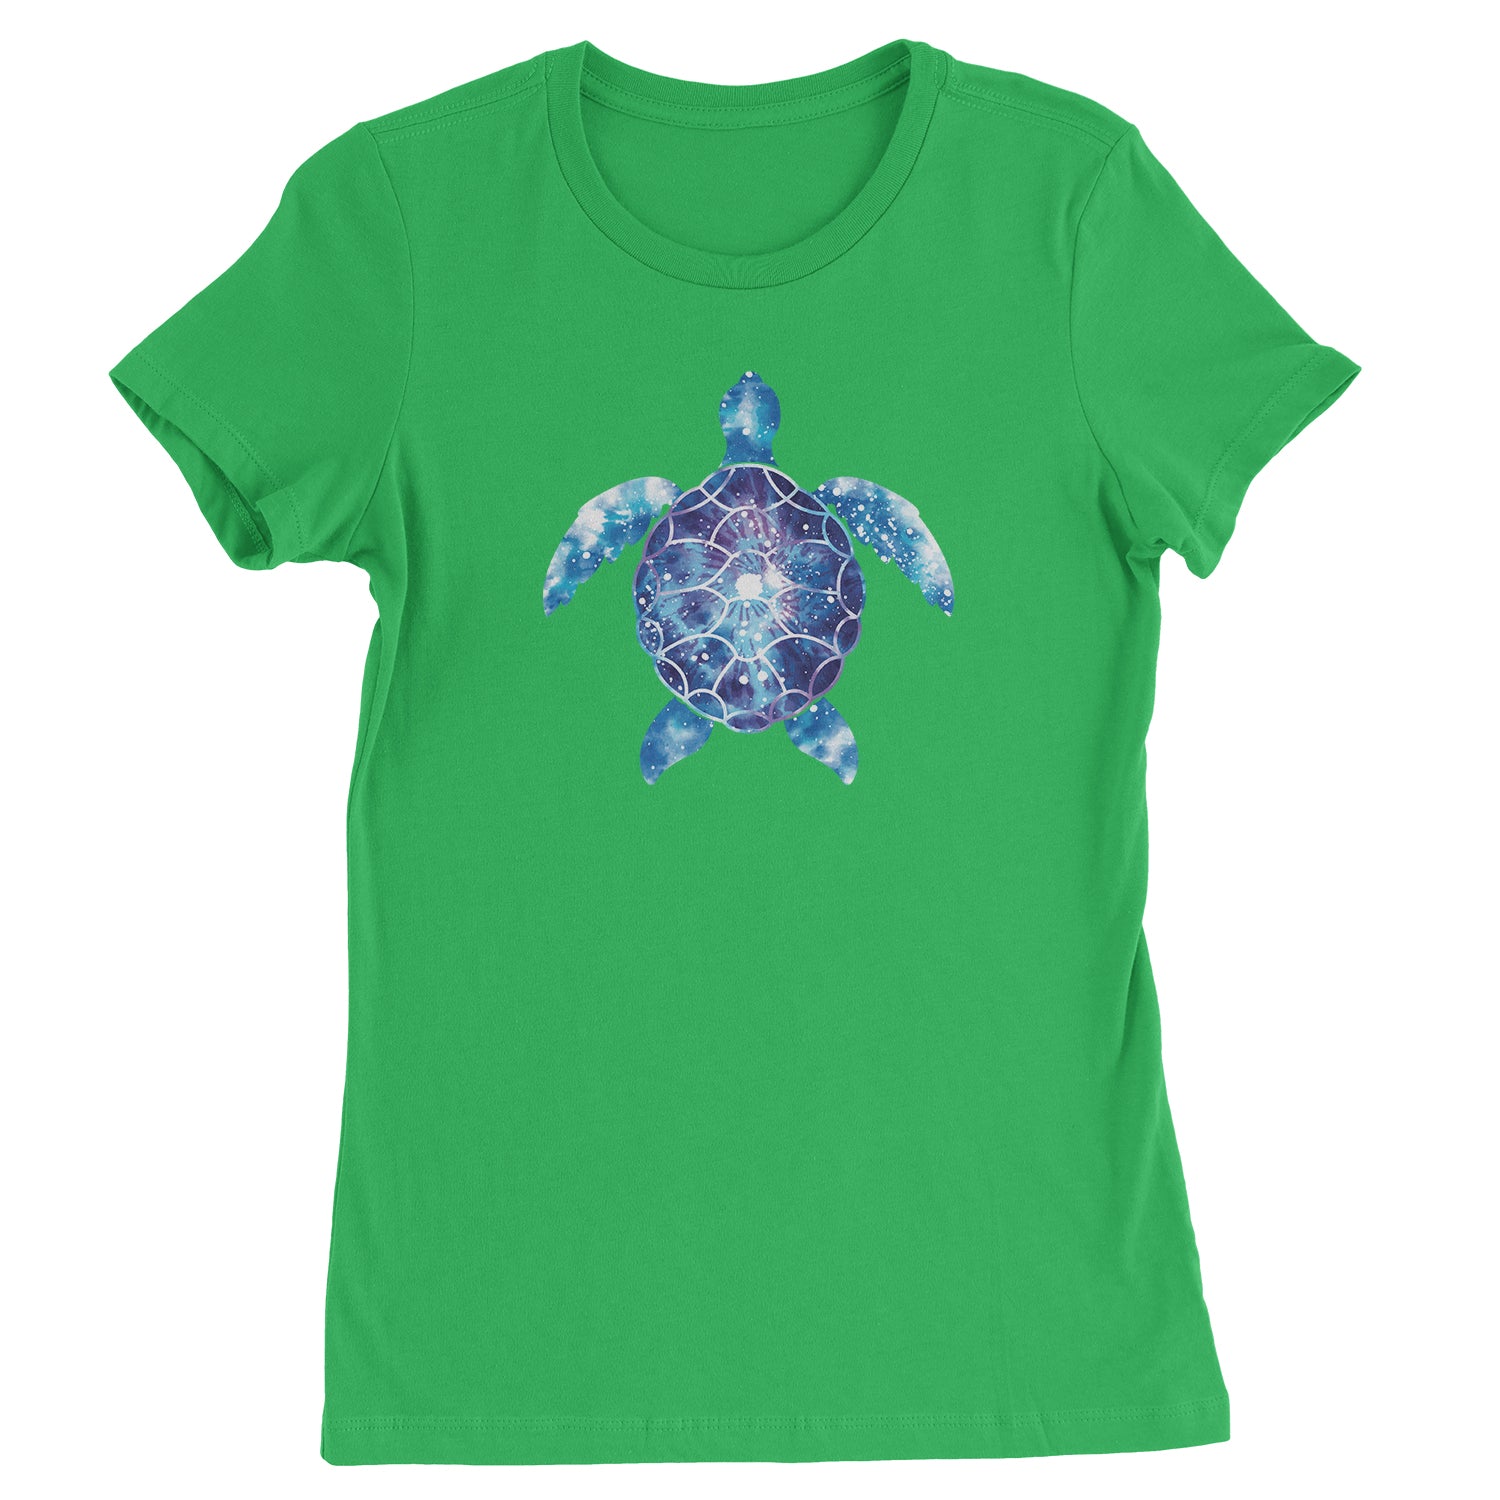 Tie Dye Sea Turtle Womens T-shirt eco, friendly, life, ocean, turtle by Expression Tees